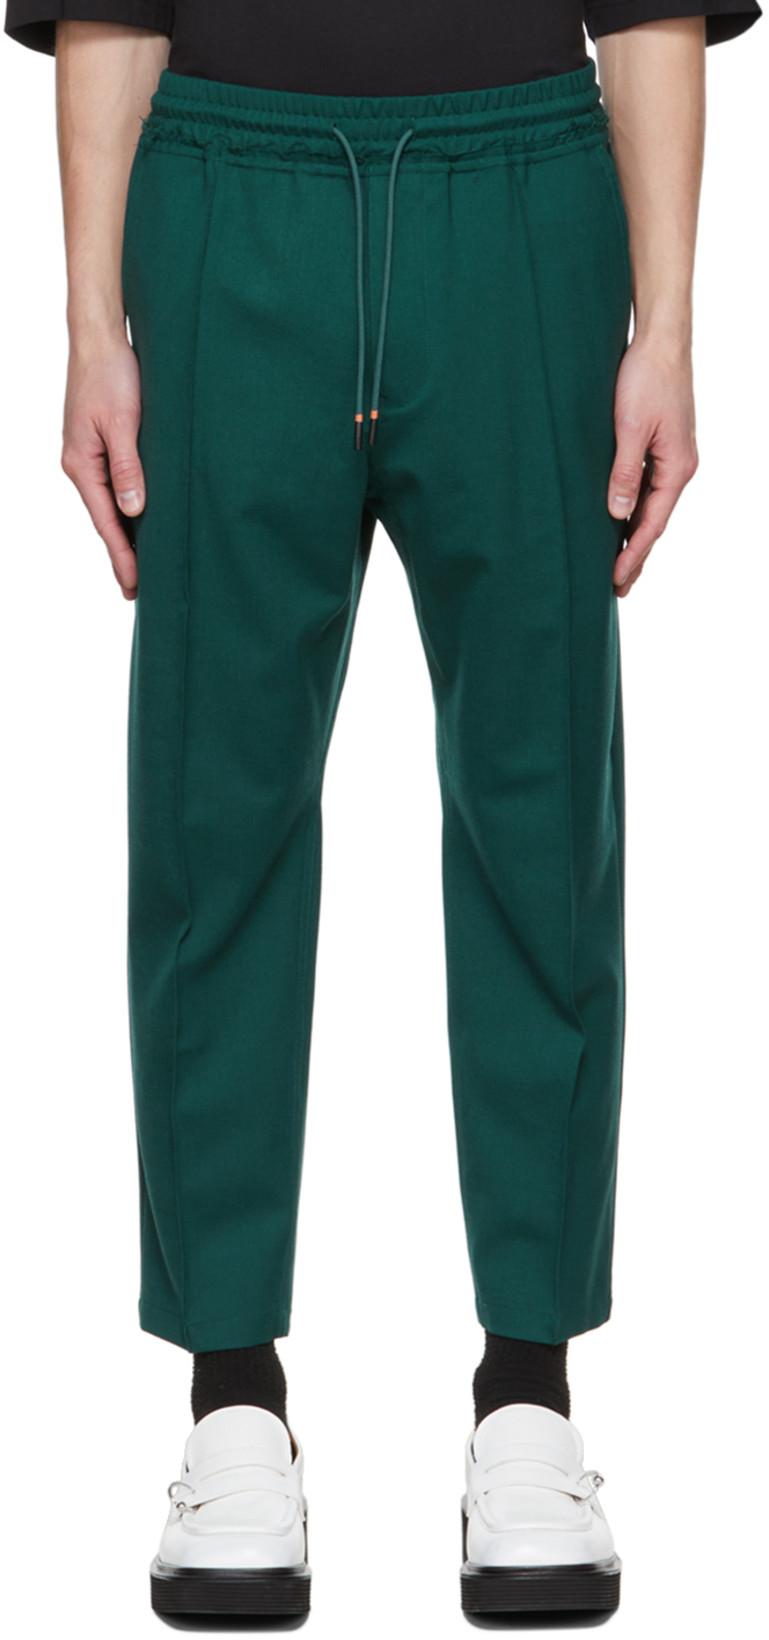 Green Frayed Trousers by A PERSONAL NOTE 73